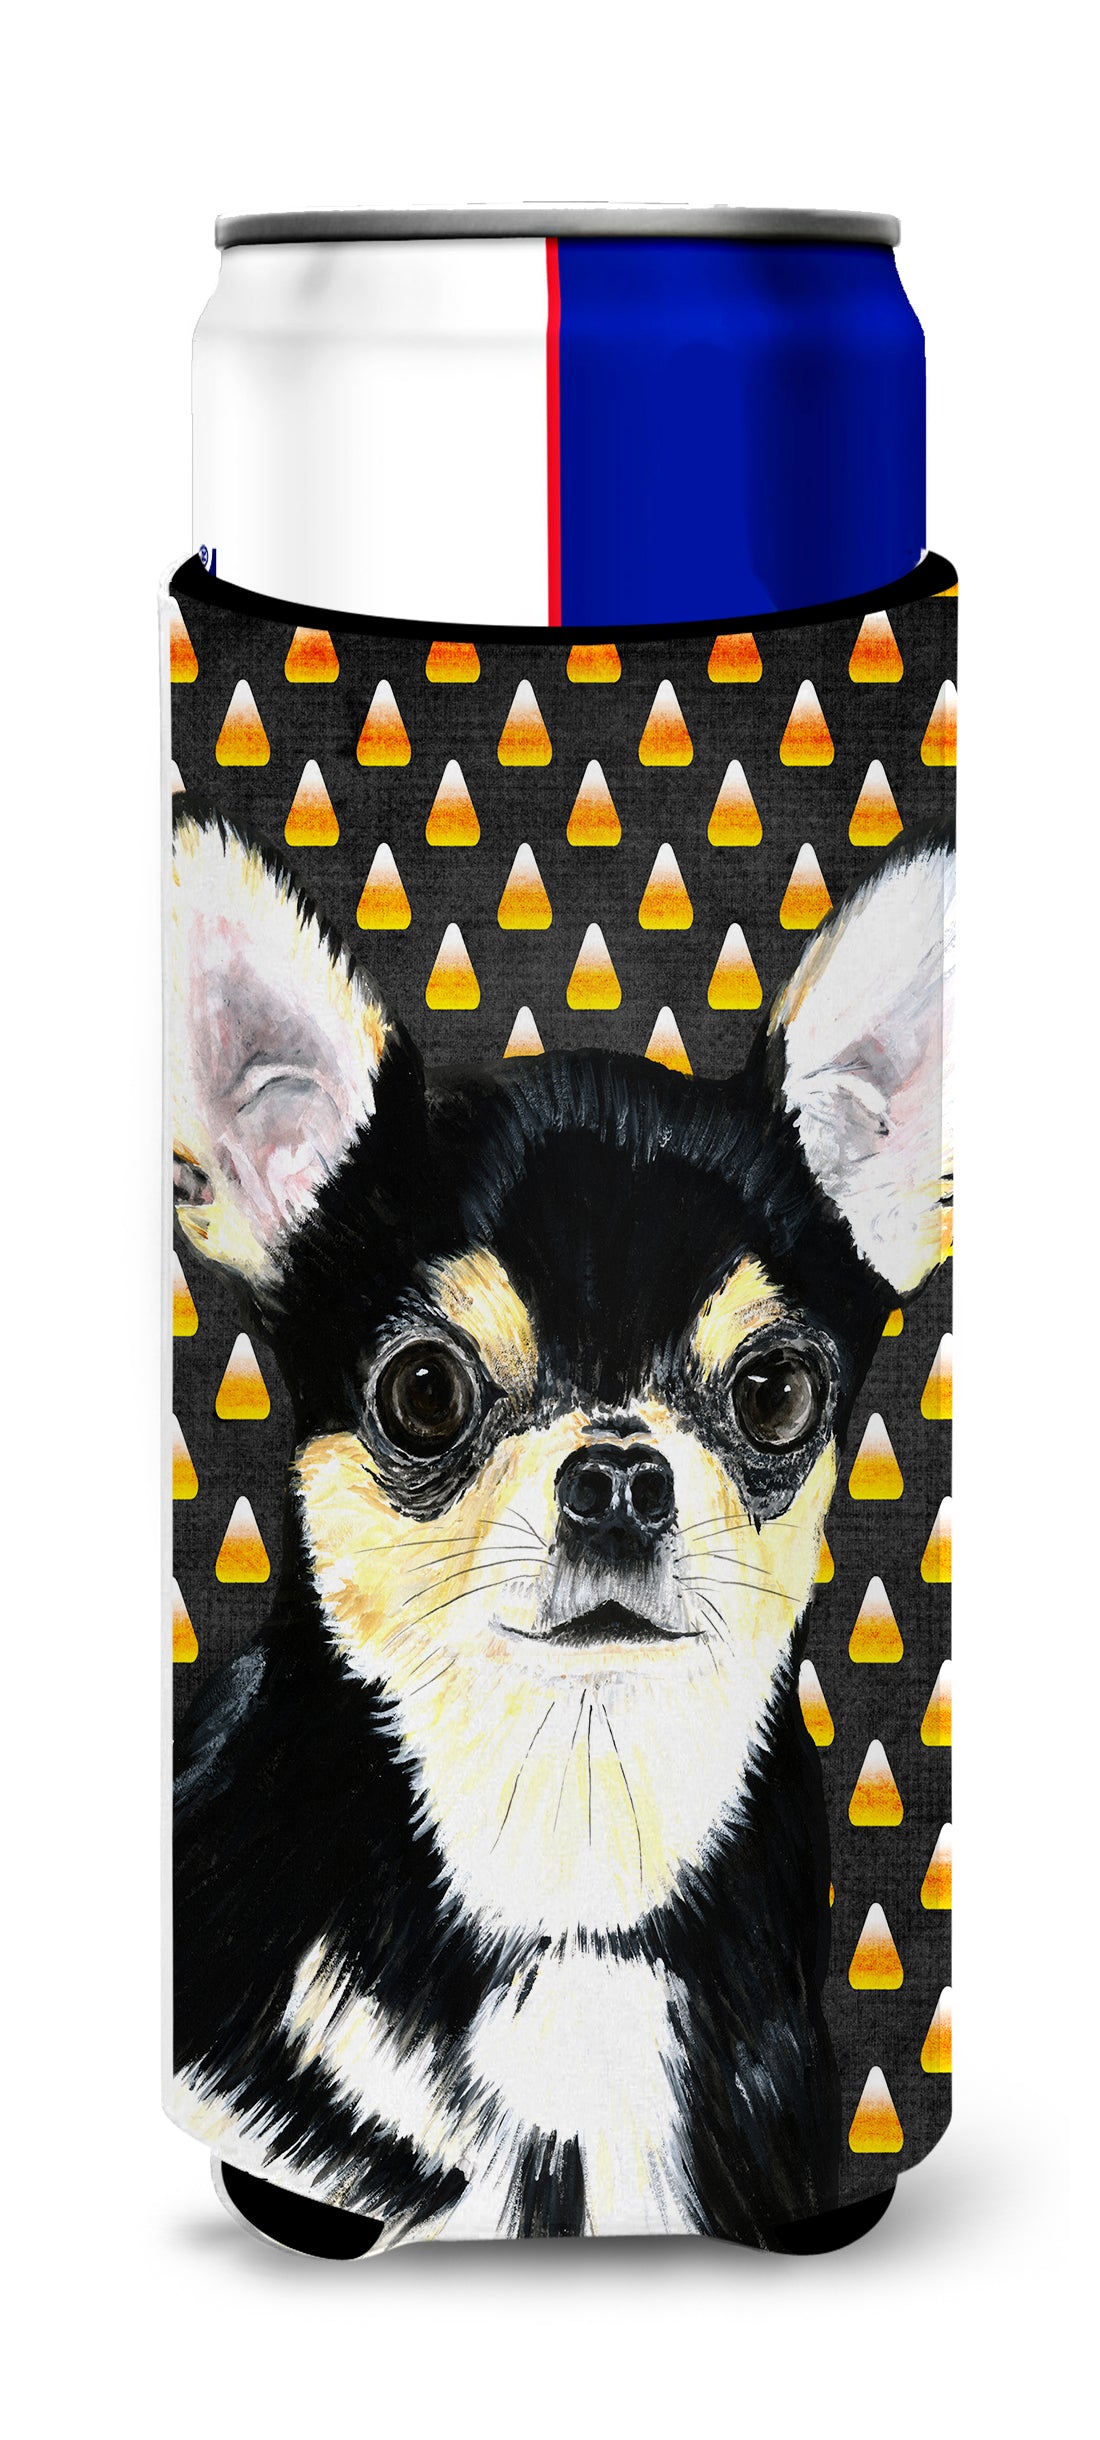 Chihuahua Candy Corn Halloween Portrait Ultra Beverage Insulators for slim cans SC9197MUK.